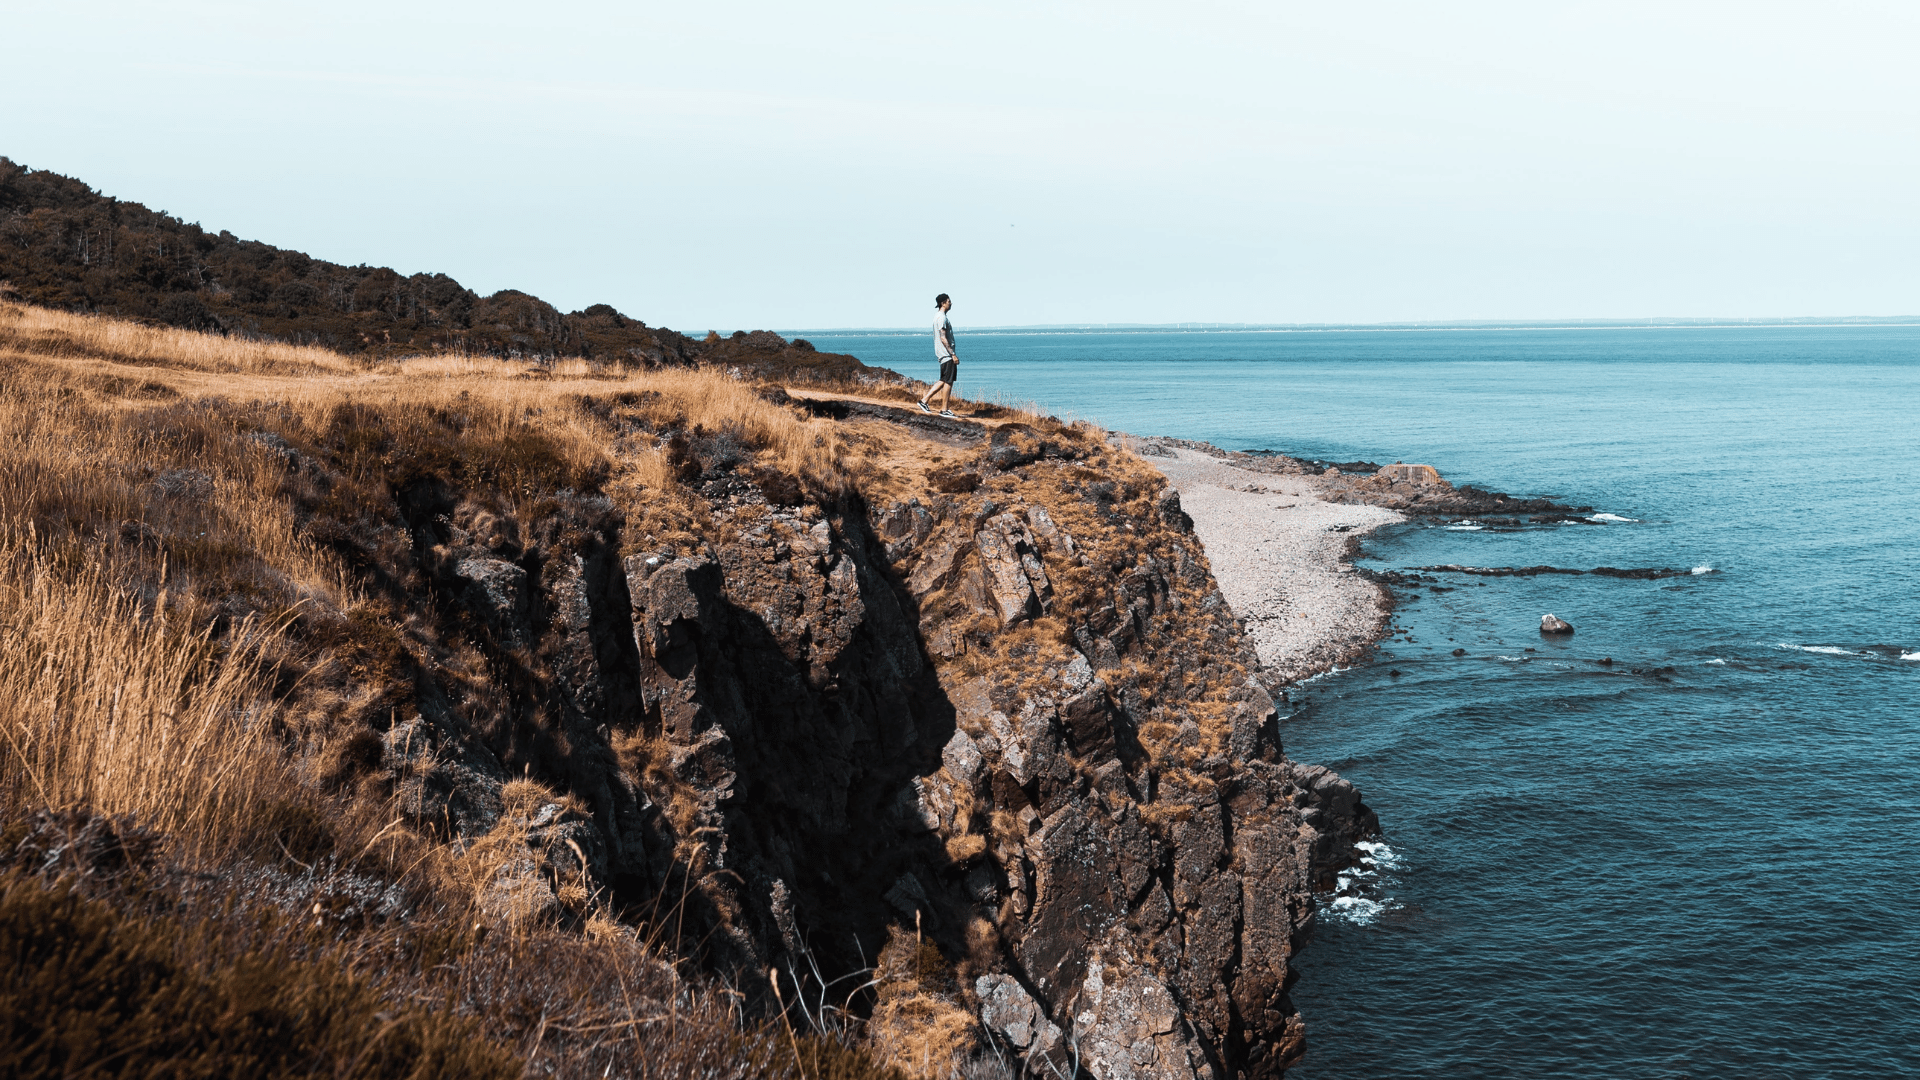 A young person is standing on top of a steep cliff overlooking the ocean between Sweden and Denmark.